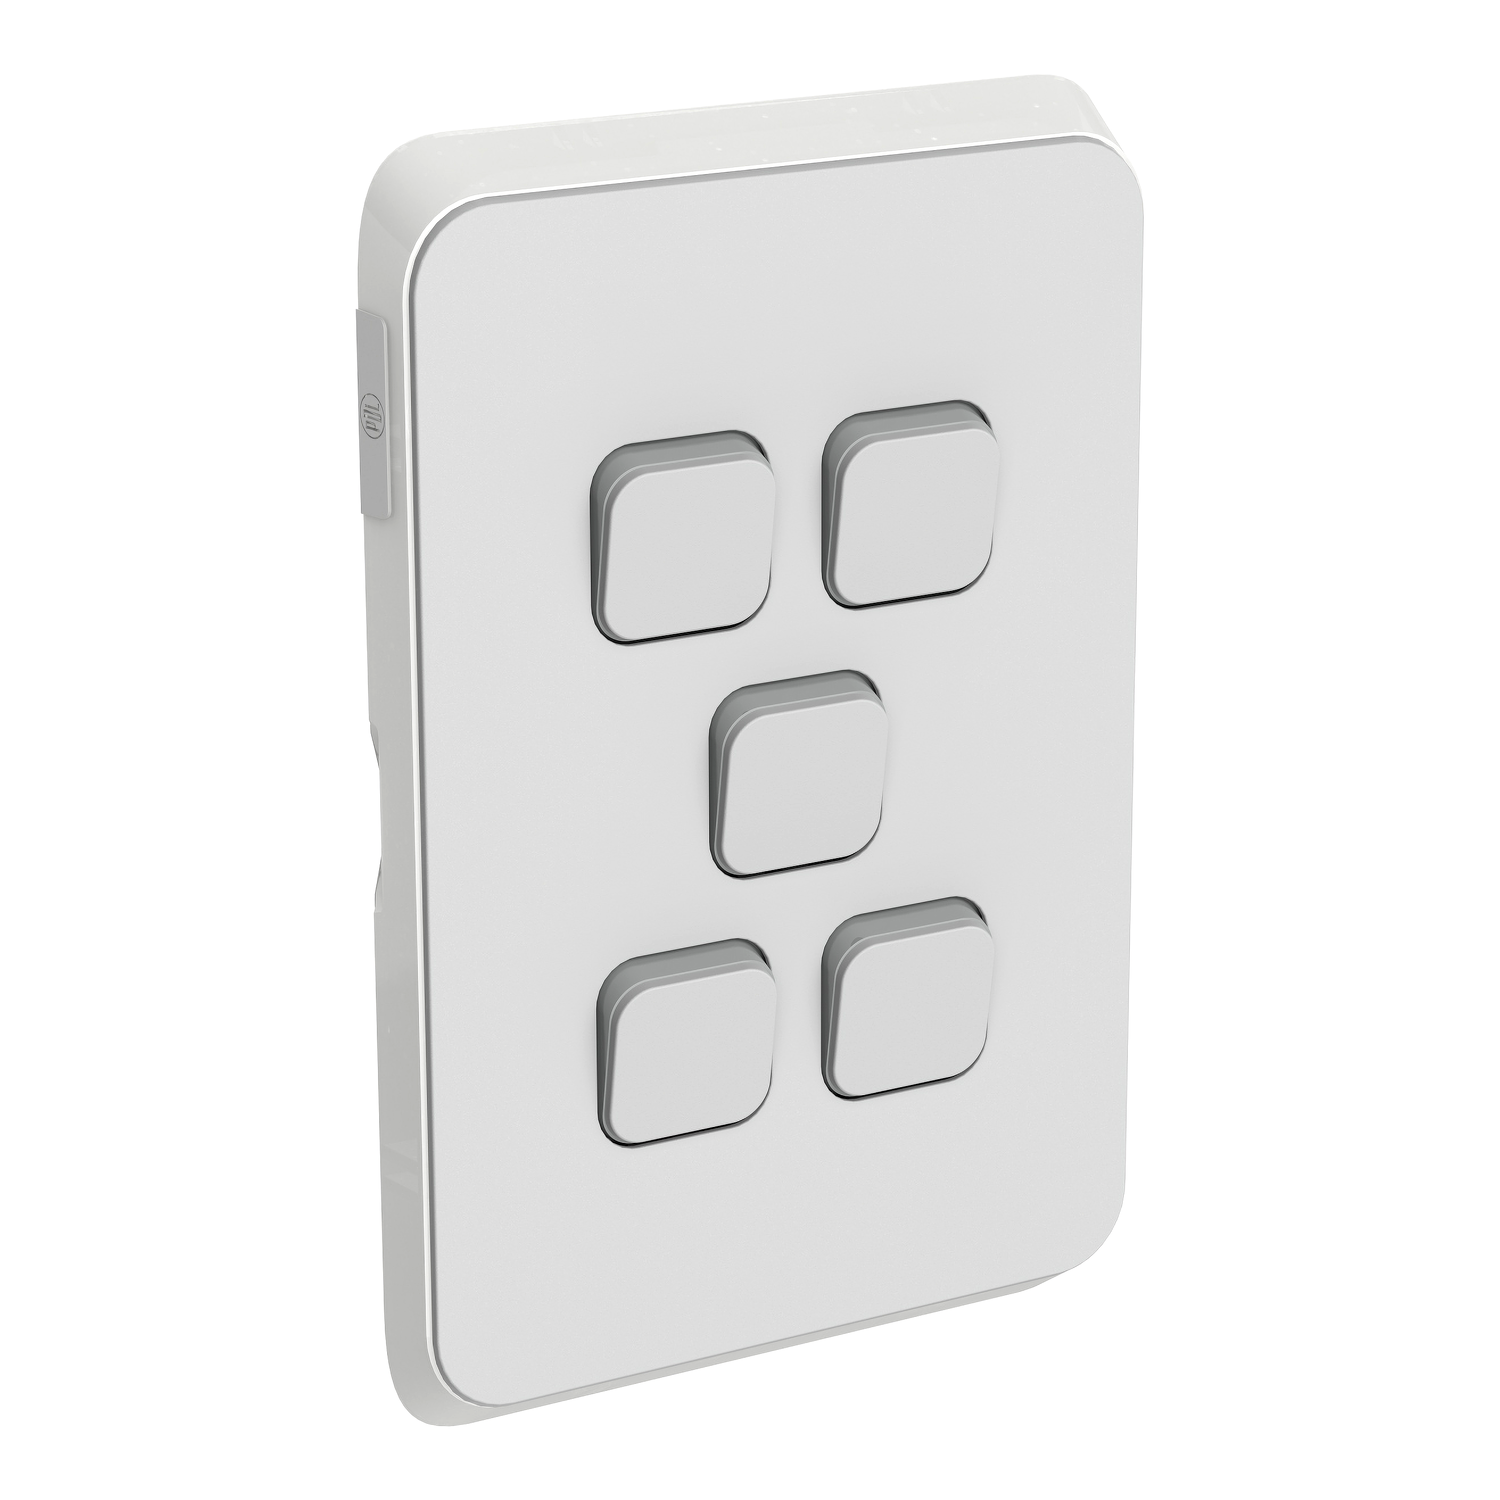 PDL Iconic - Cover Plate Switch 5-Gang - Cool Grey